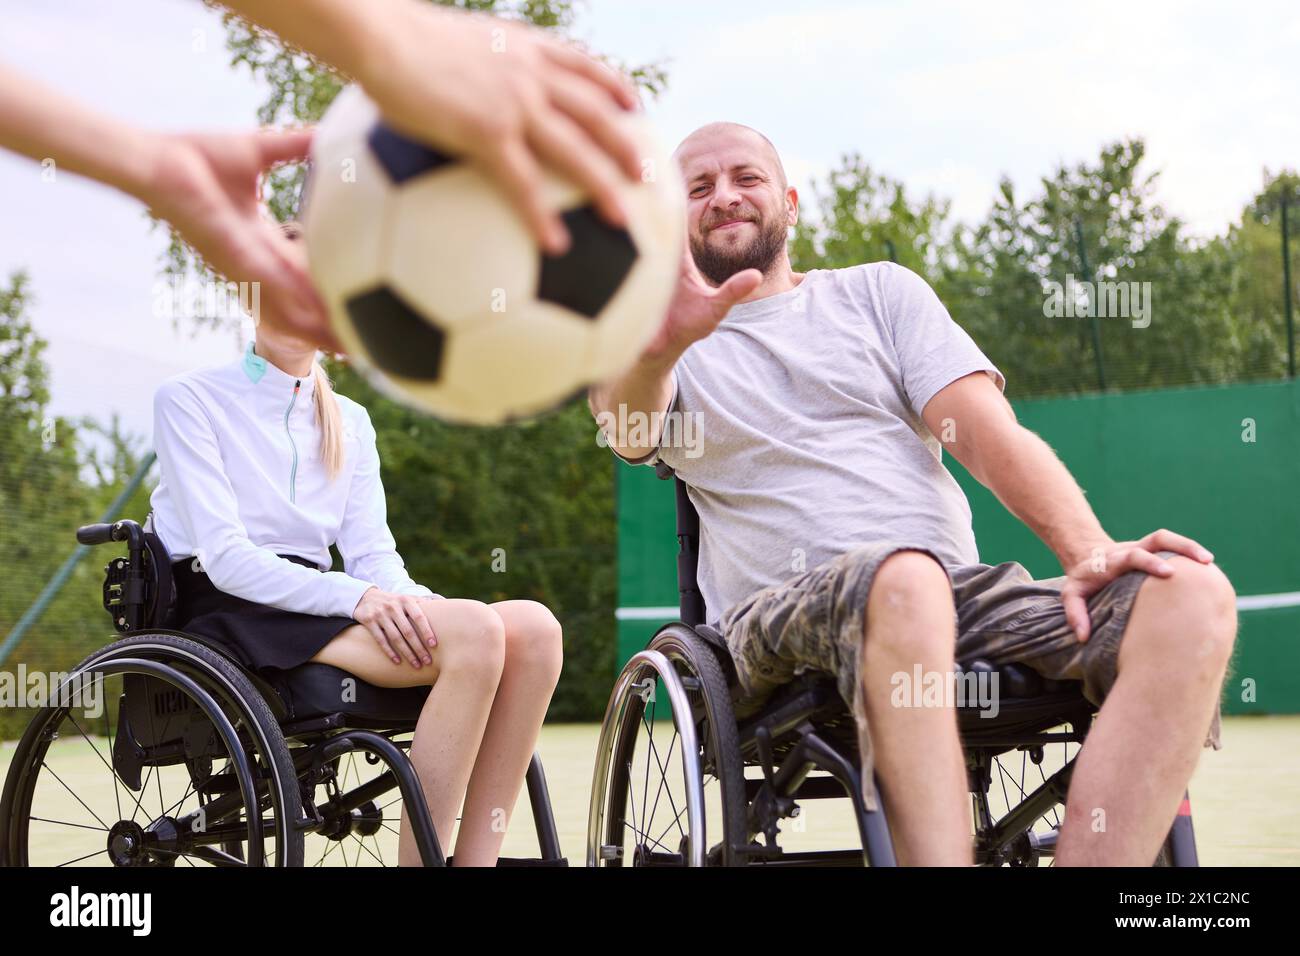 A group of active adults in wheelchairs engaging in a sport outdoors on a sunny day, exemplifying inclusion and teamwork. Stock Photo